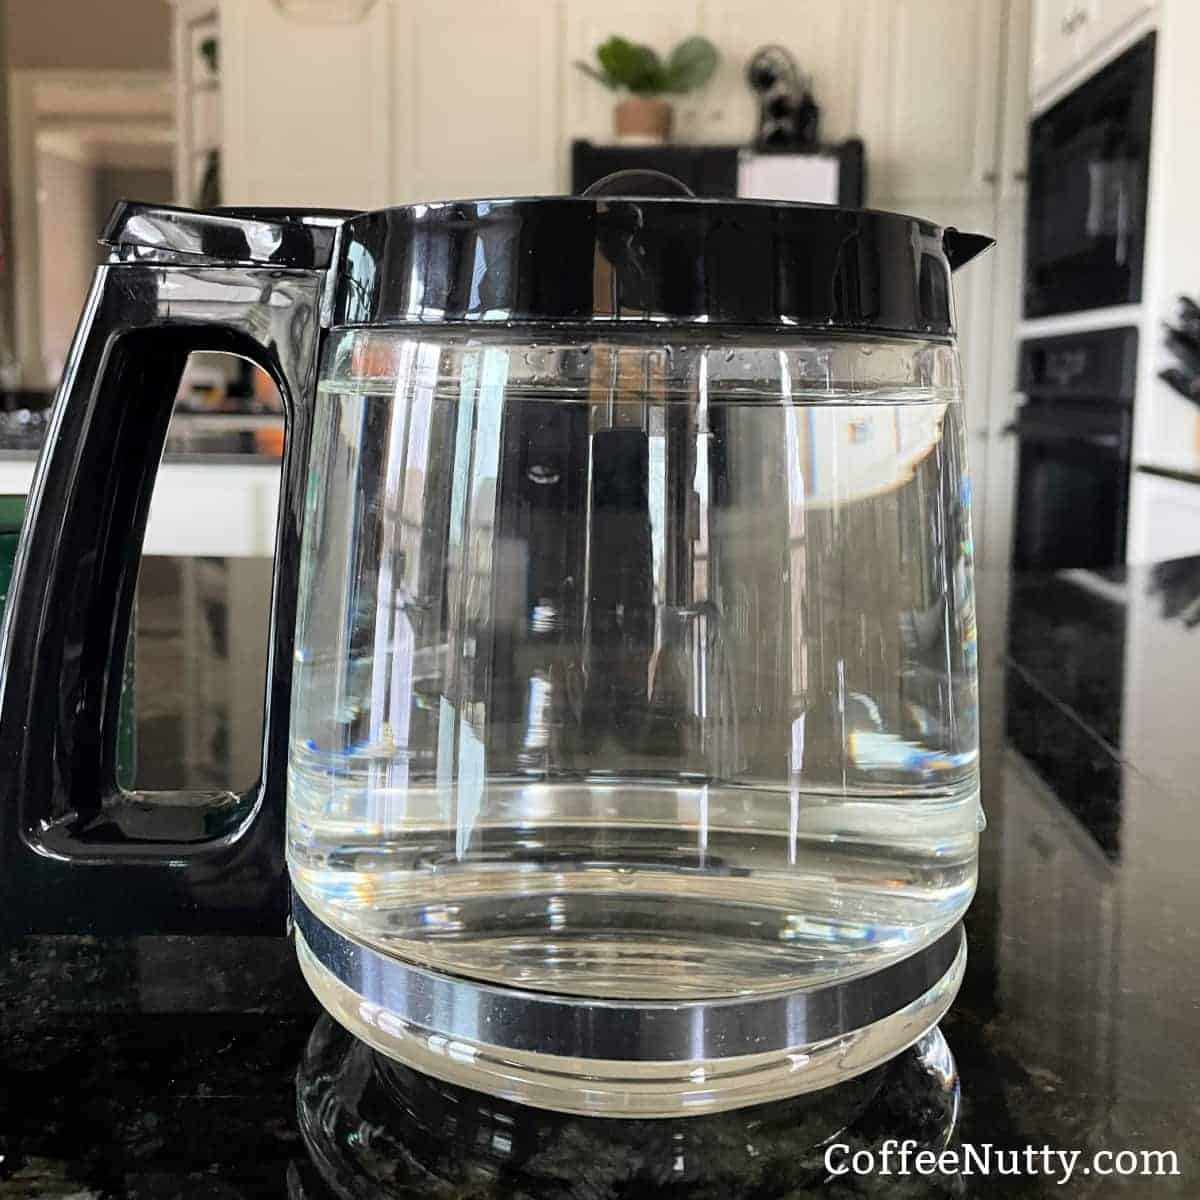 Water filled to top of 12 cup coffee pot carafe.